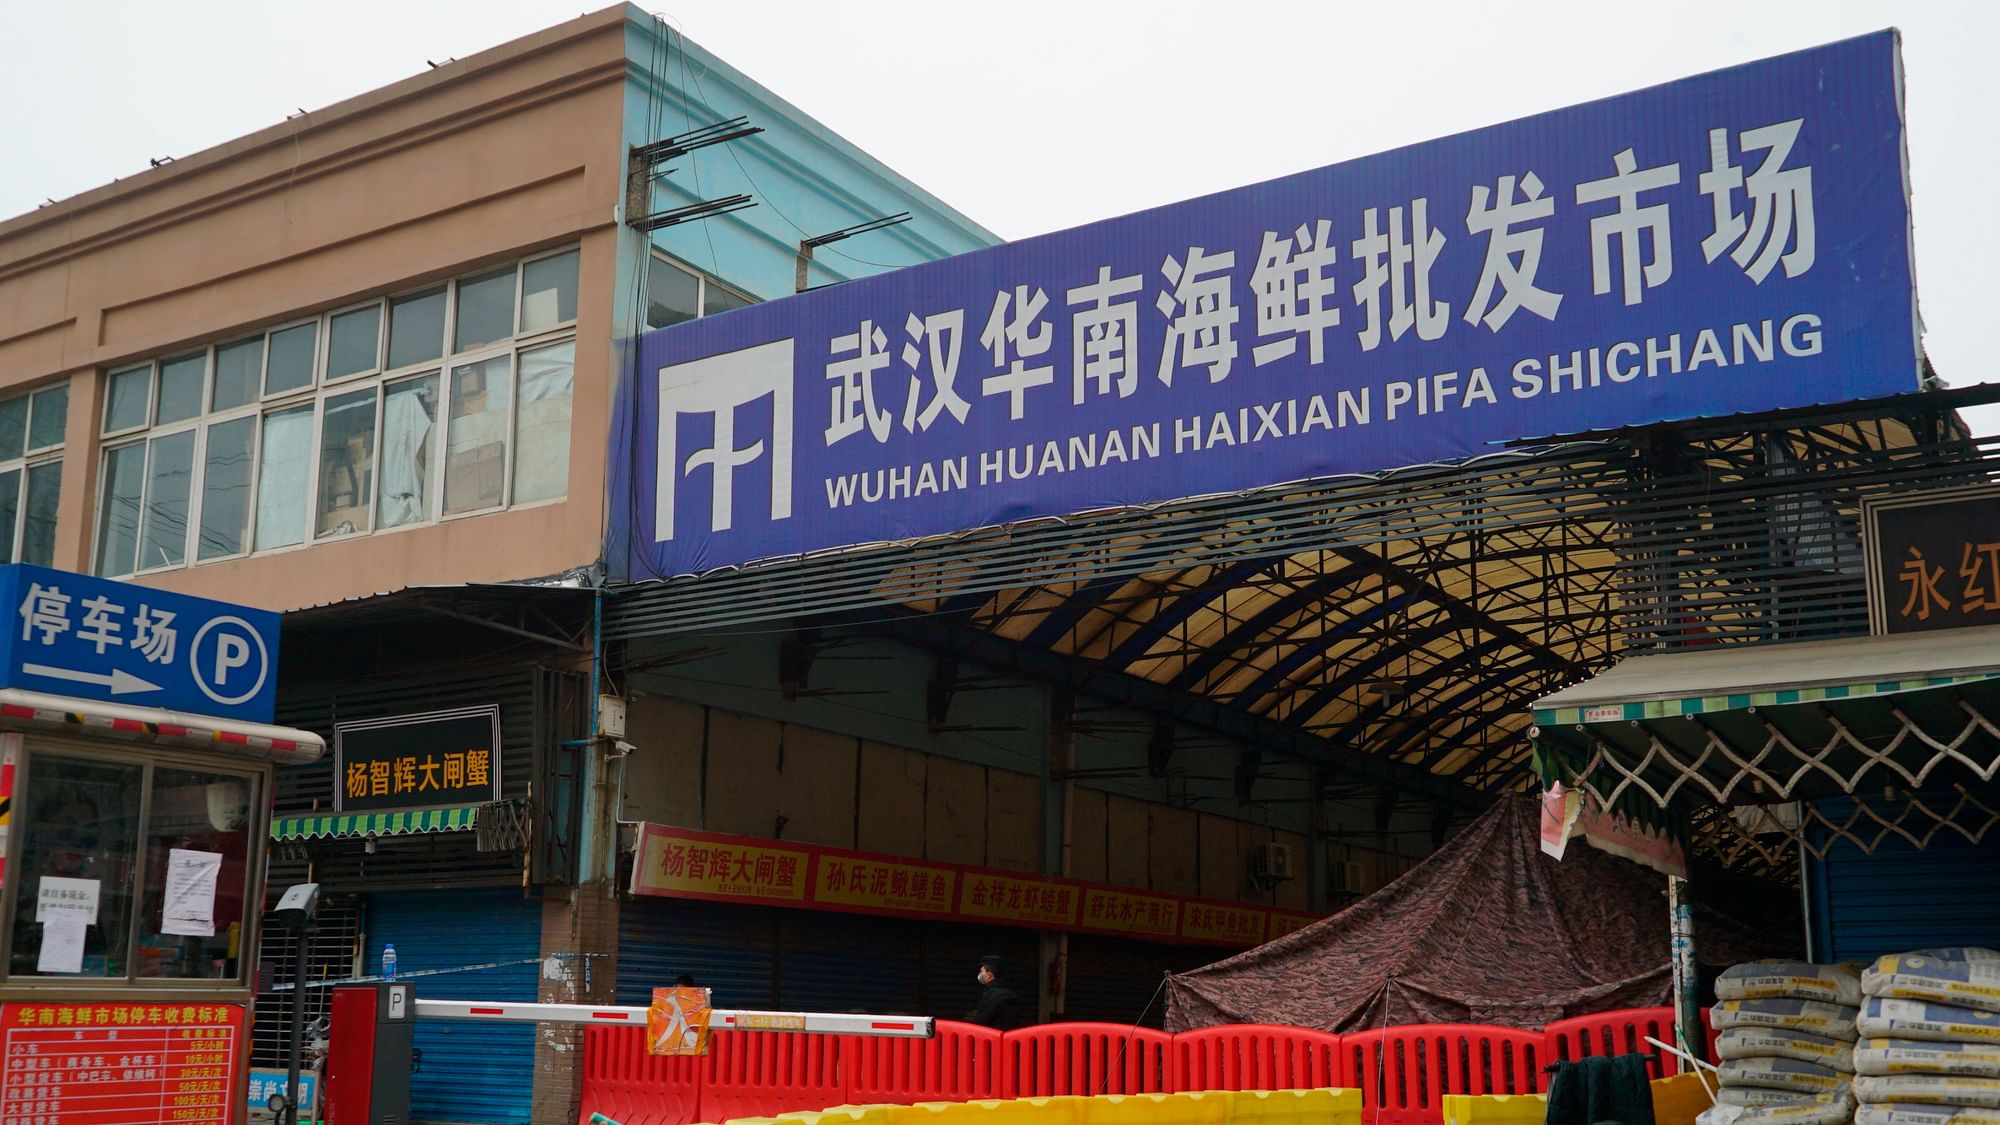 The Wuhan Huanan Wholesale Seafood Market, where a number of people related to the market fell ill with a virus, sits closed in Wuhan, China, Tuesday, Jan. 21, 2020.